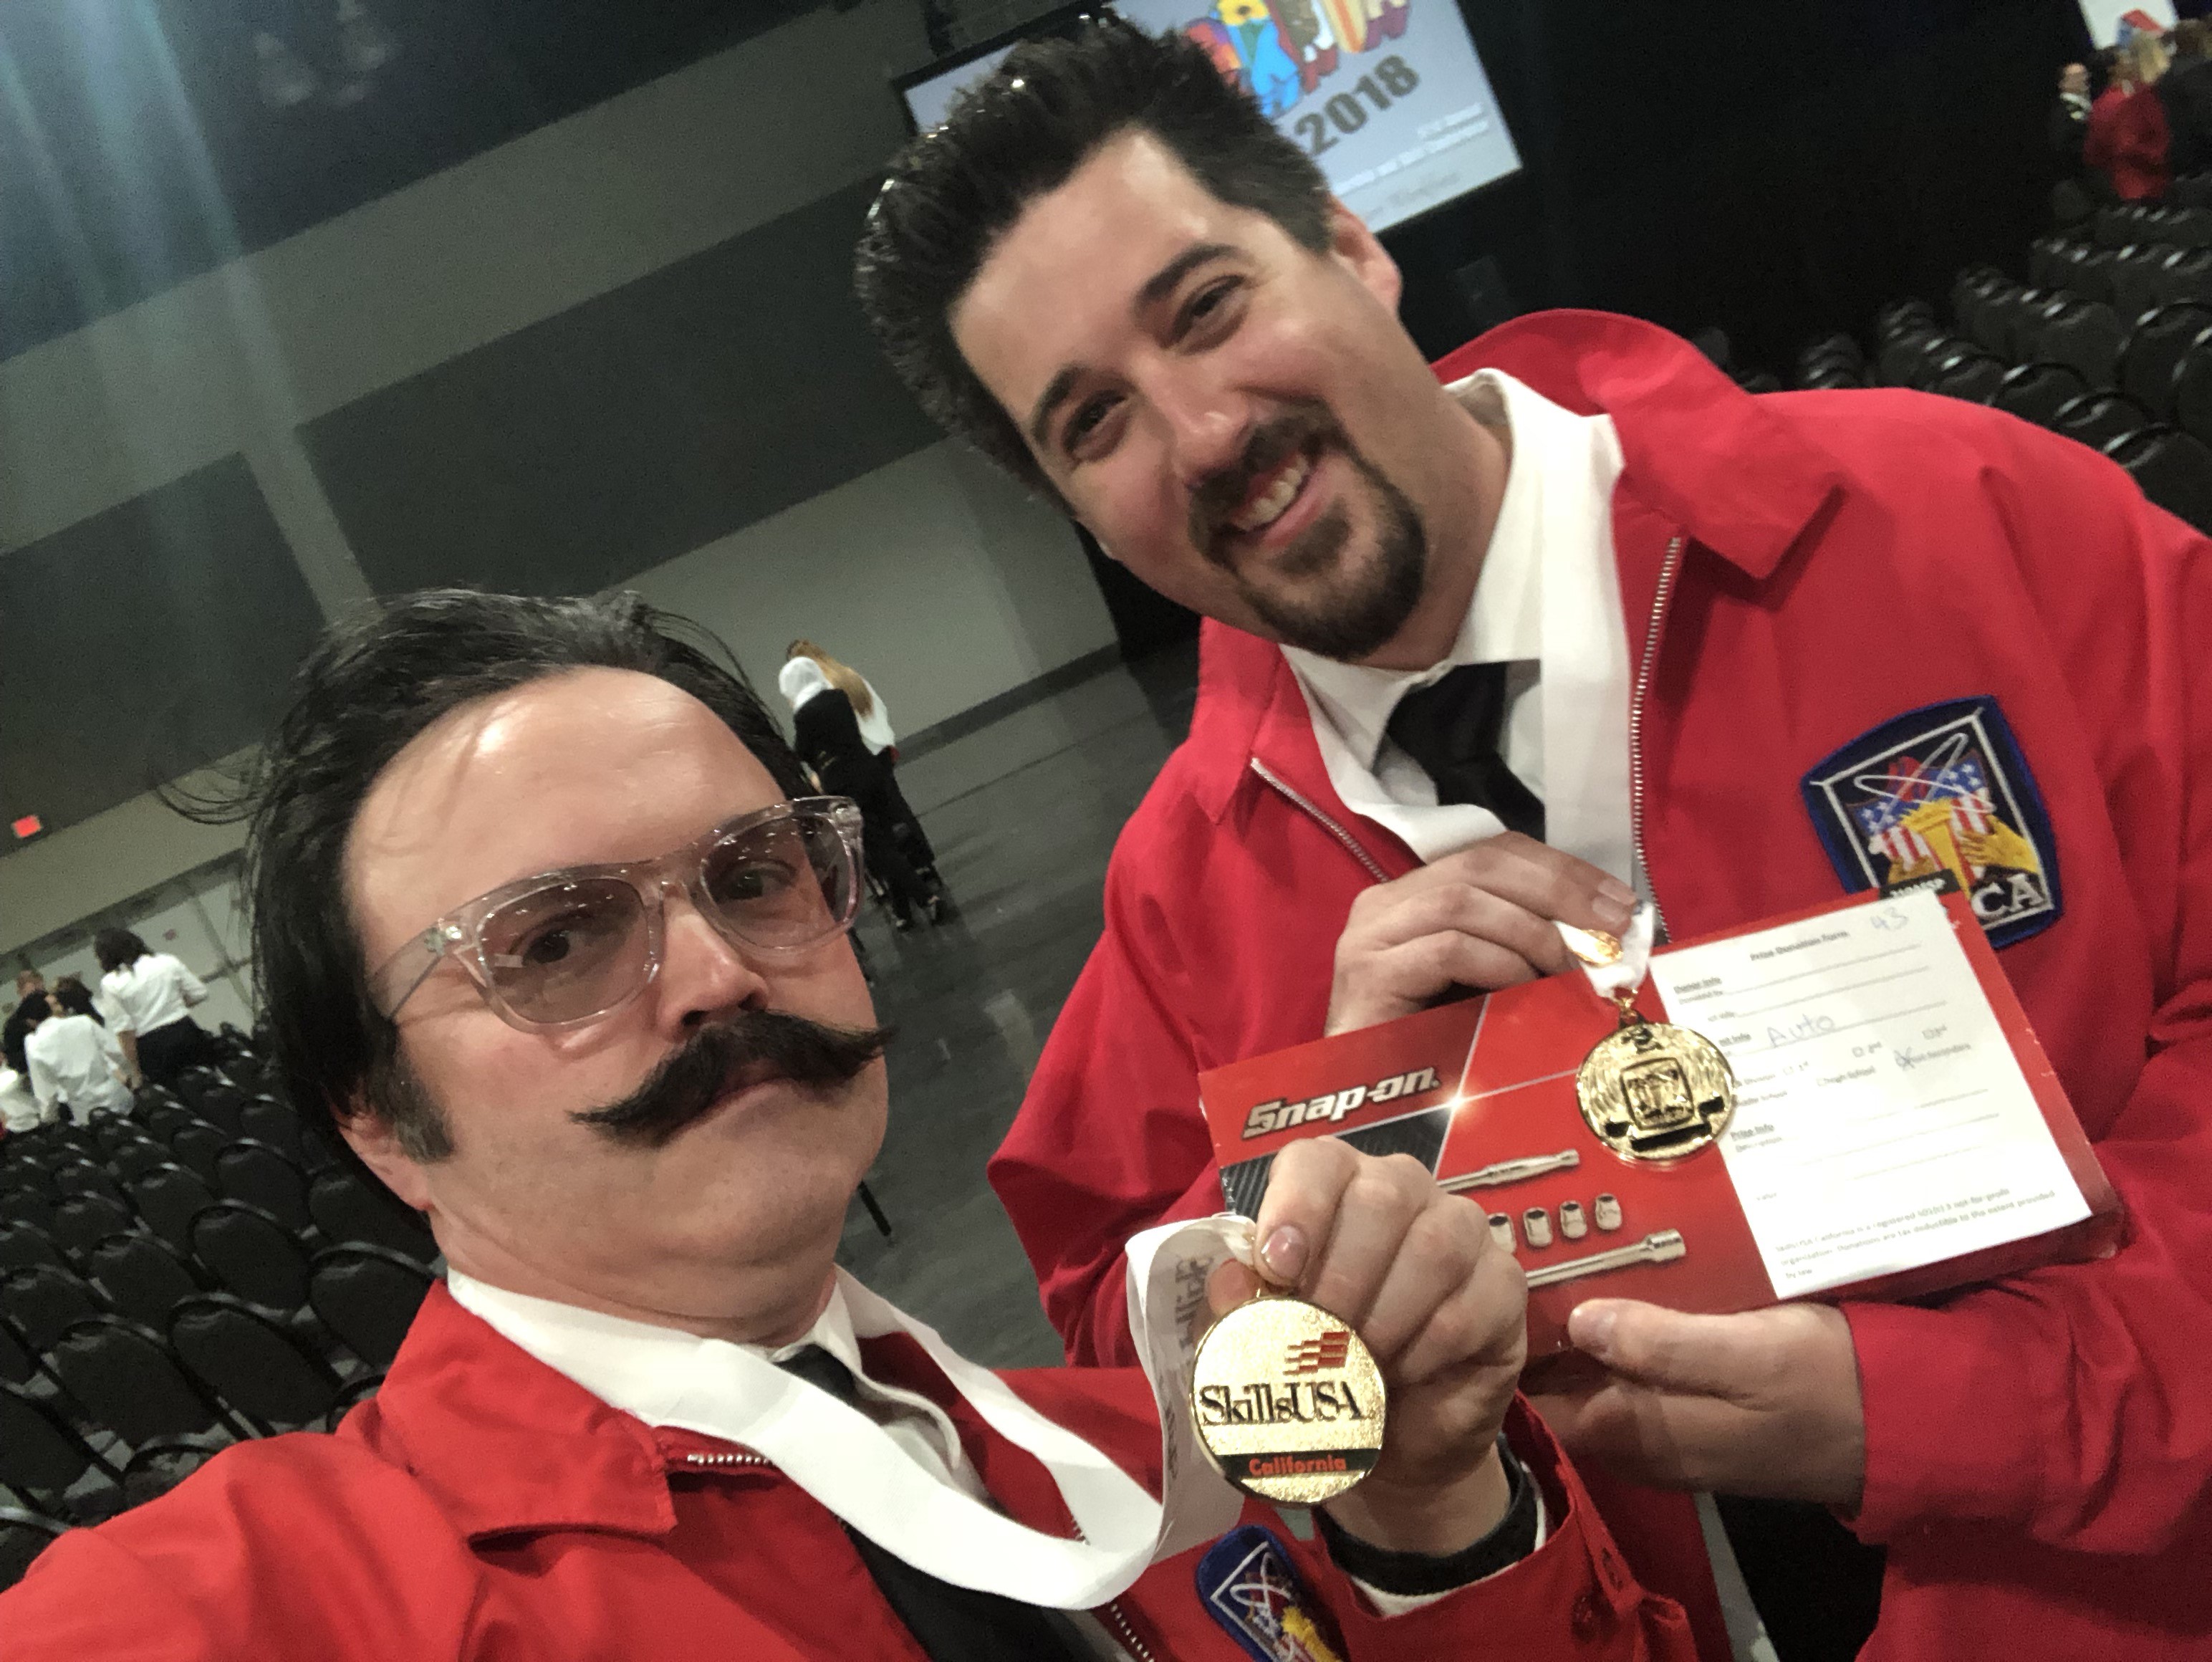 Shane Gallagher and Associate Professor Dan Bonnema of San Joaquin Delta College pose after Gallagher took gold at the SkillsUSA competition.